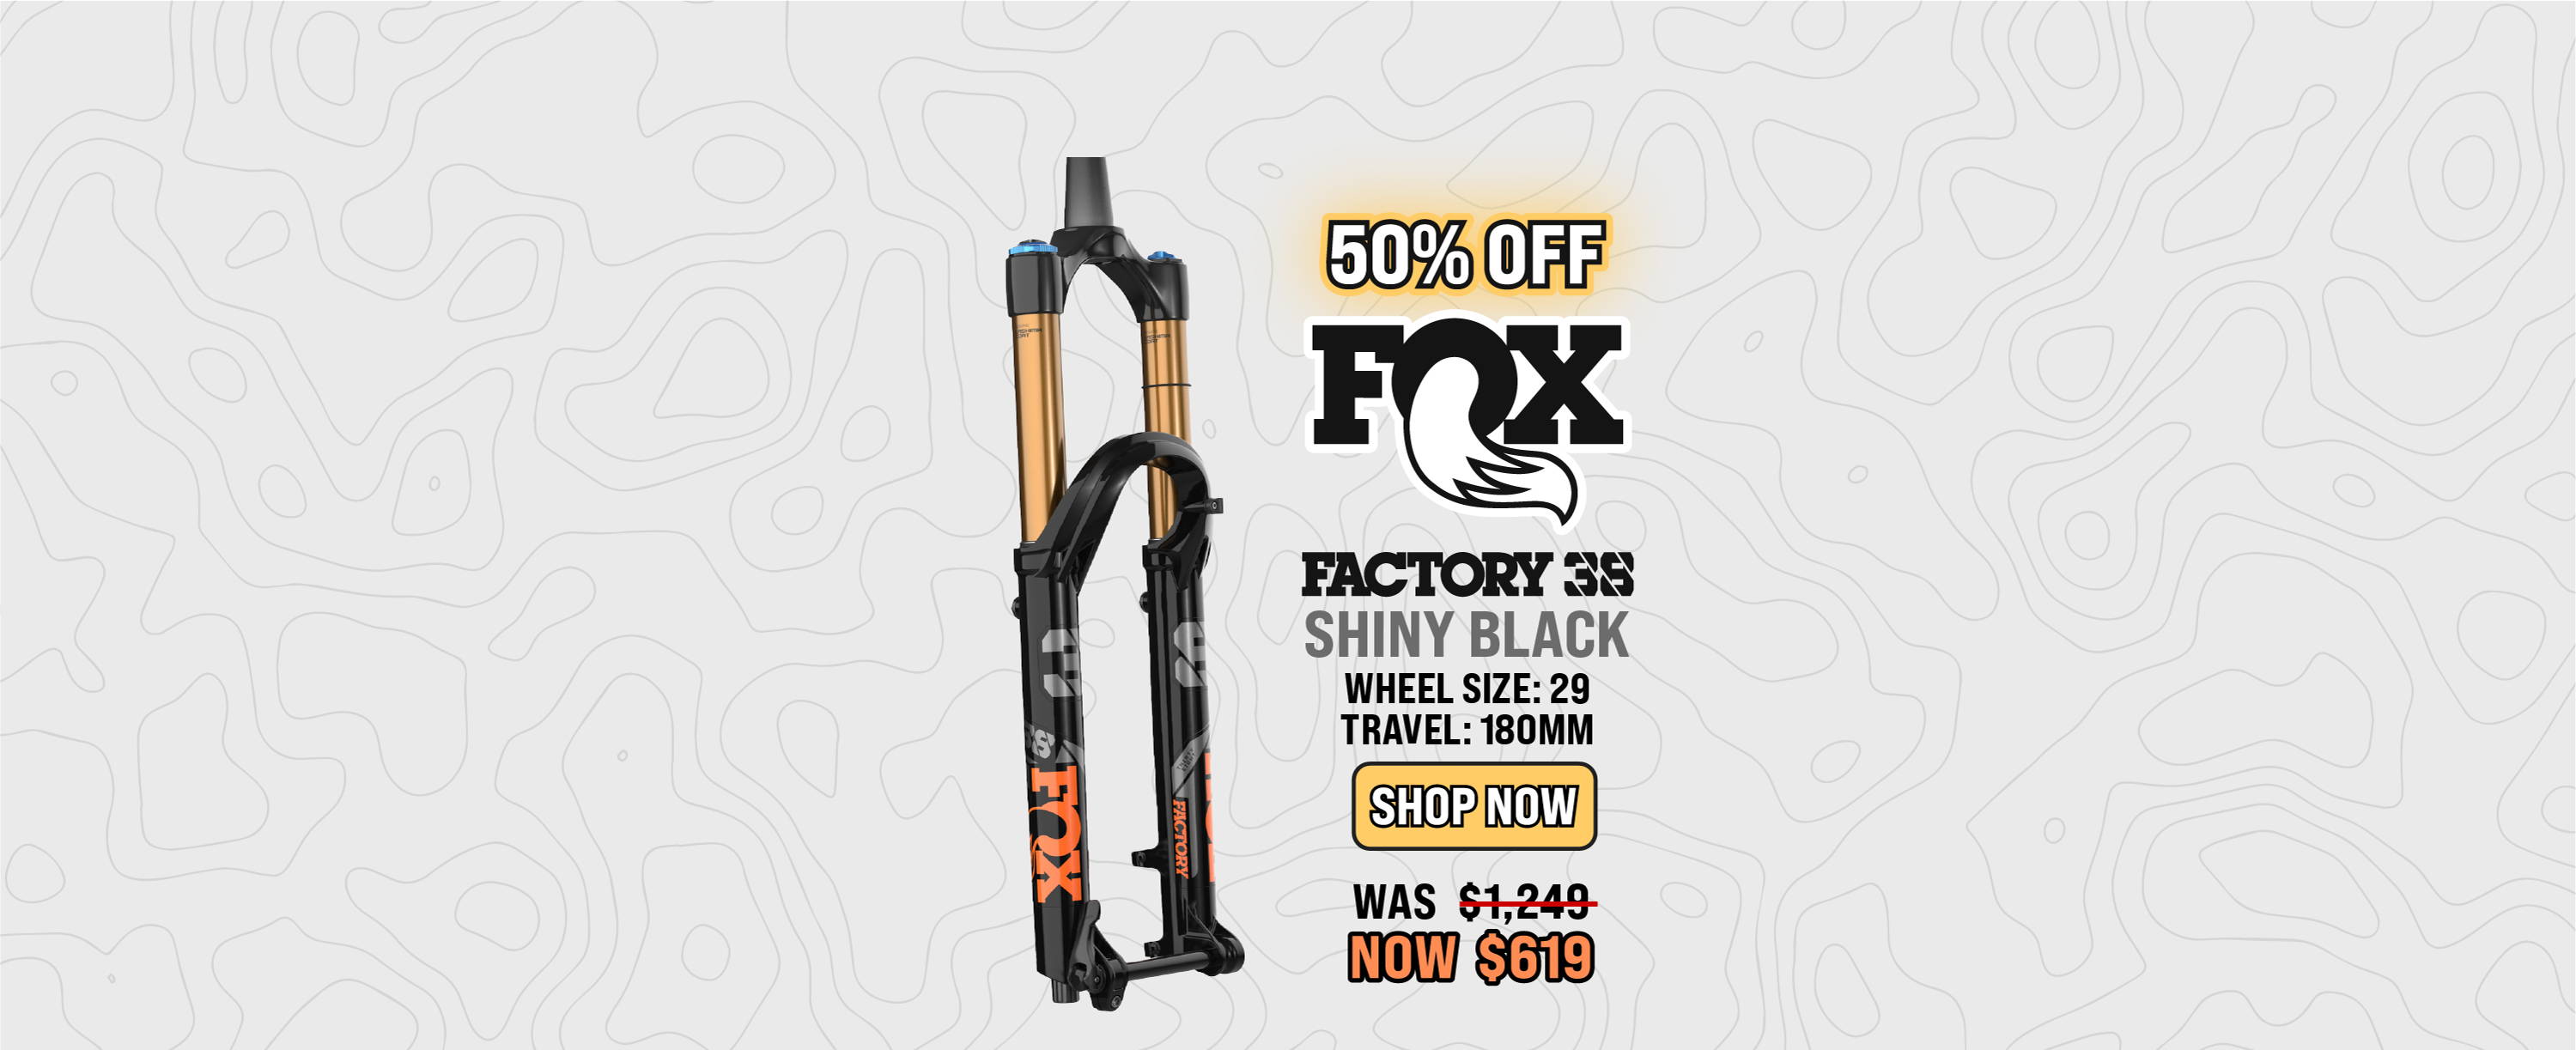 fox factory 38 sale banner with black fox 38 fork